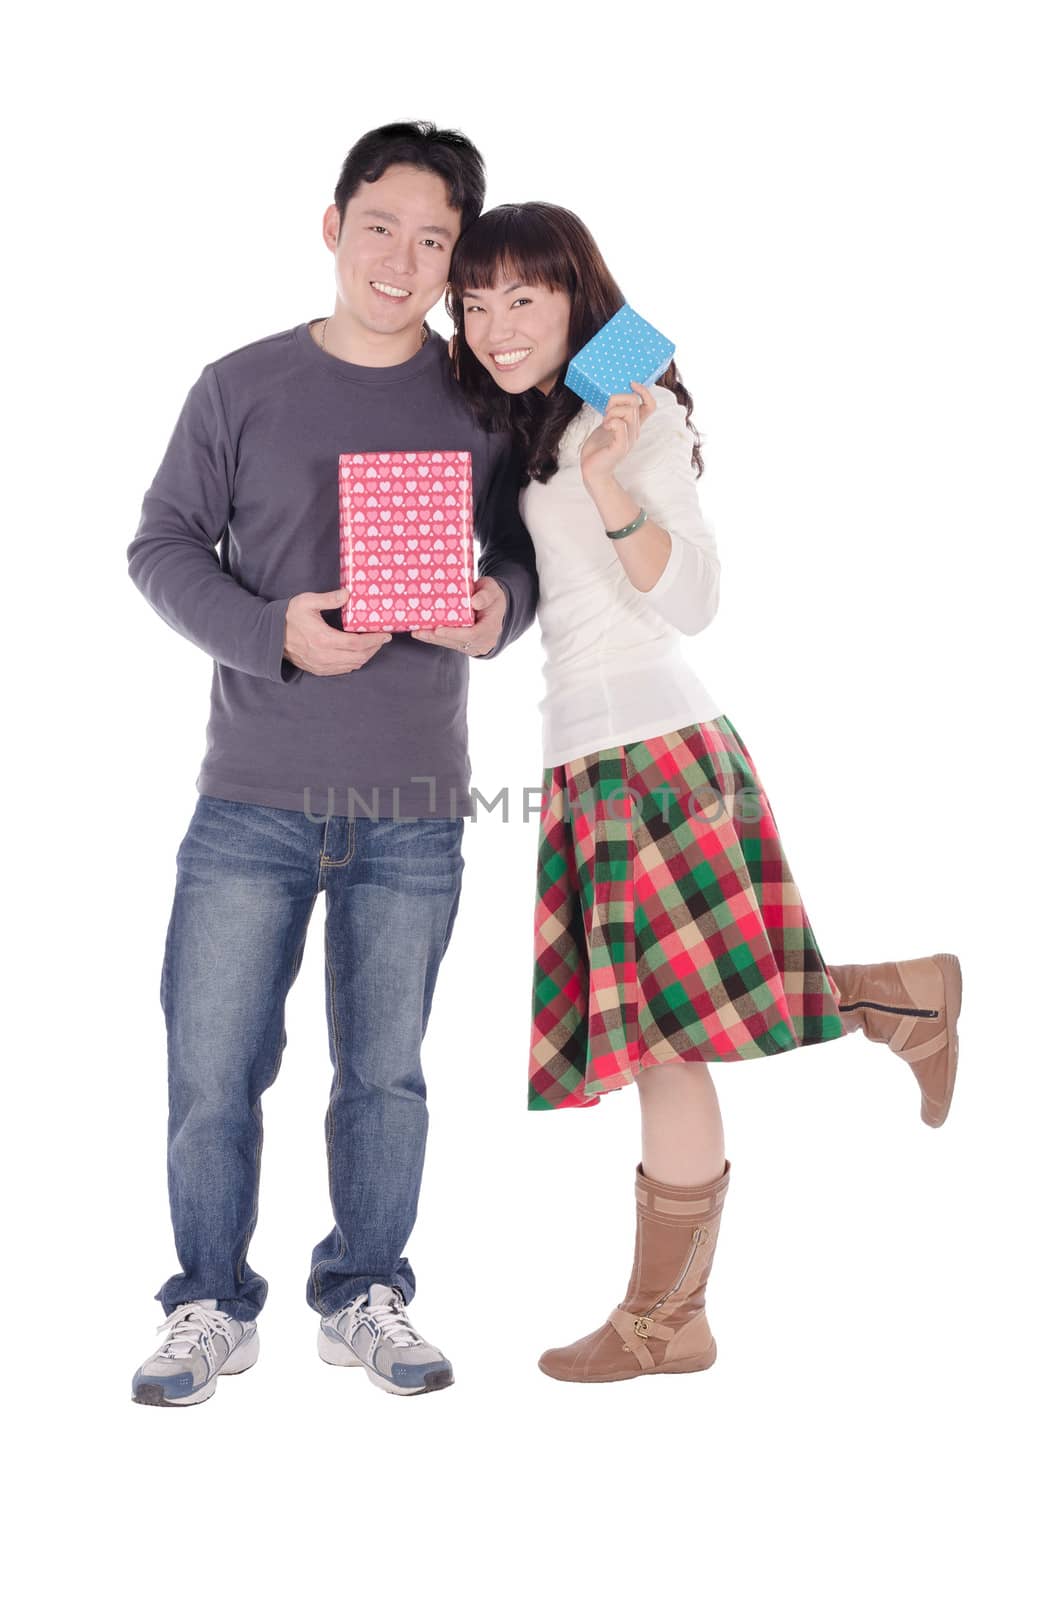 Young couple with gift over white background